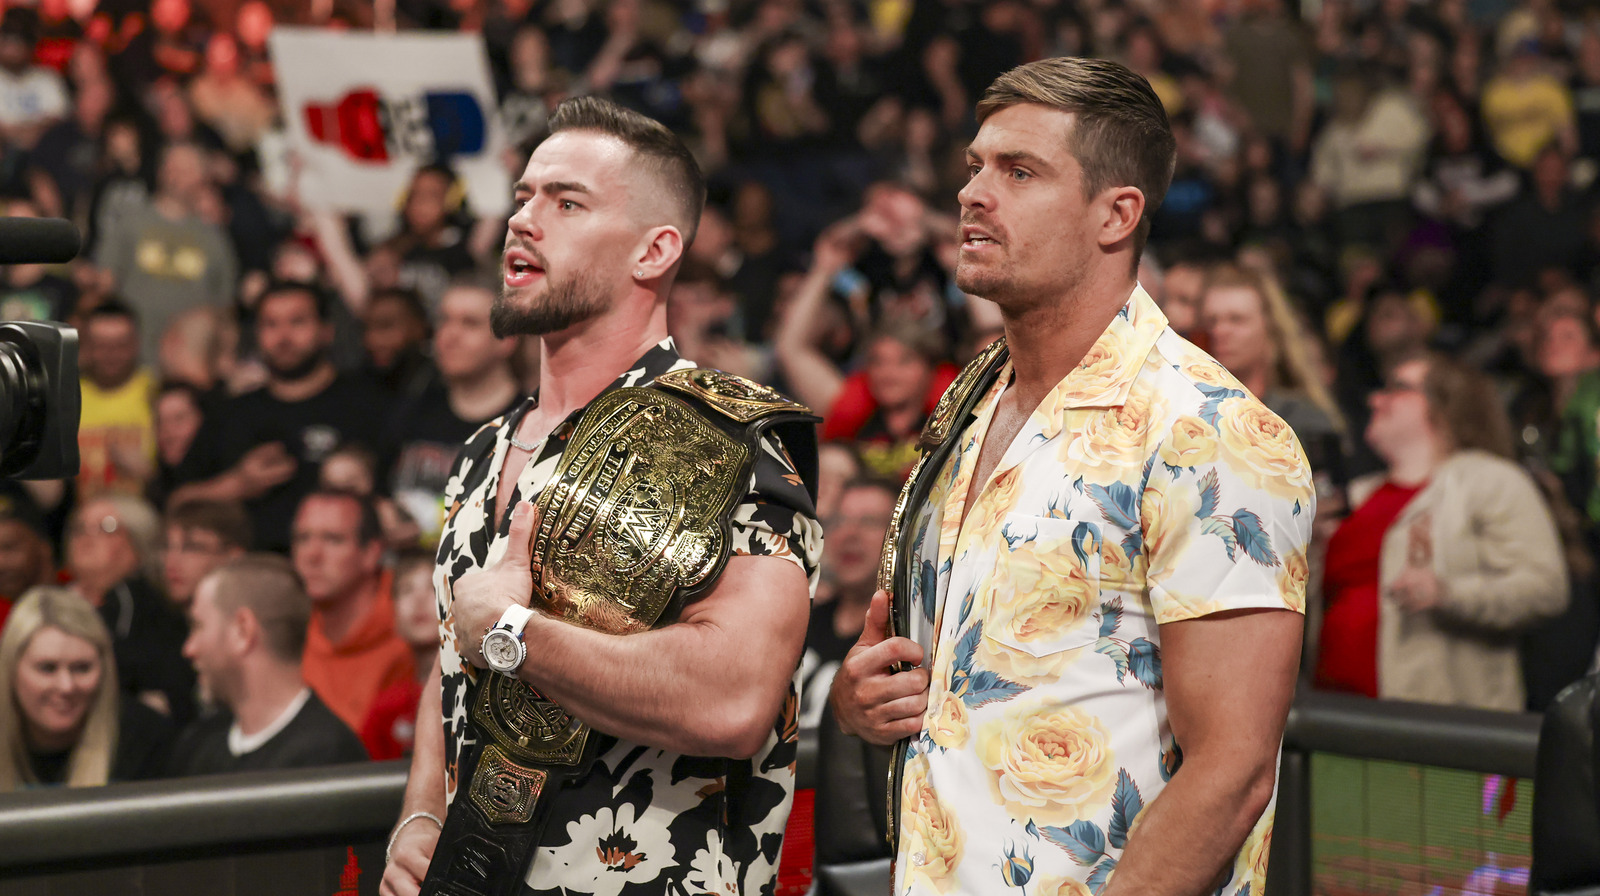 A-Town Down Under Beat Street Profits, Win First Tag Title Defense On WWE SmackDown